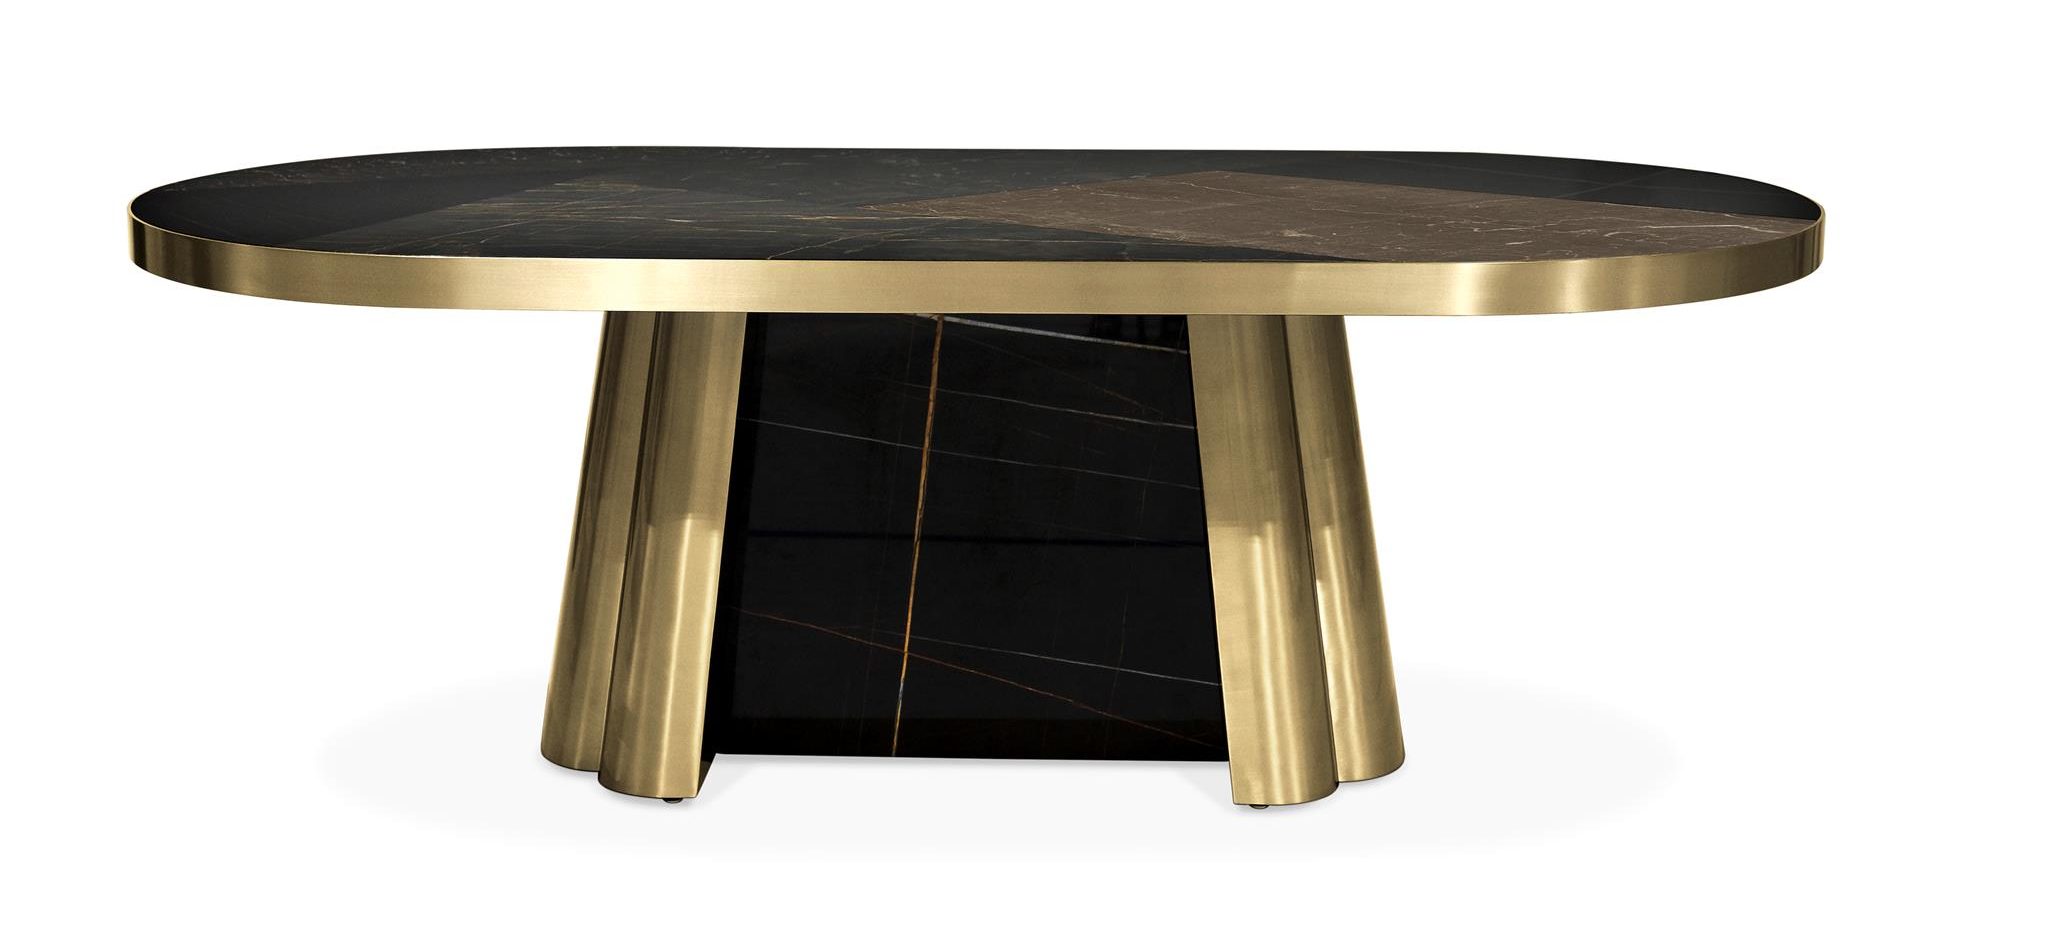 Decodiva Dining Table by KOKET - unique dining tables - marble dining tables - oval dining tables - glamorous dining tables - luxury furniture - art deco dining tables